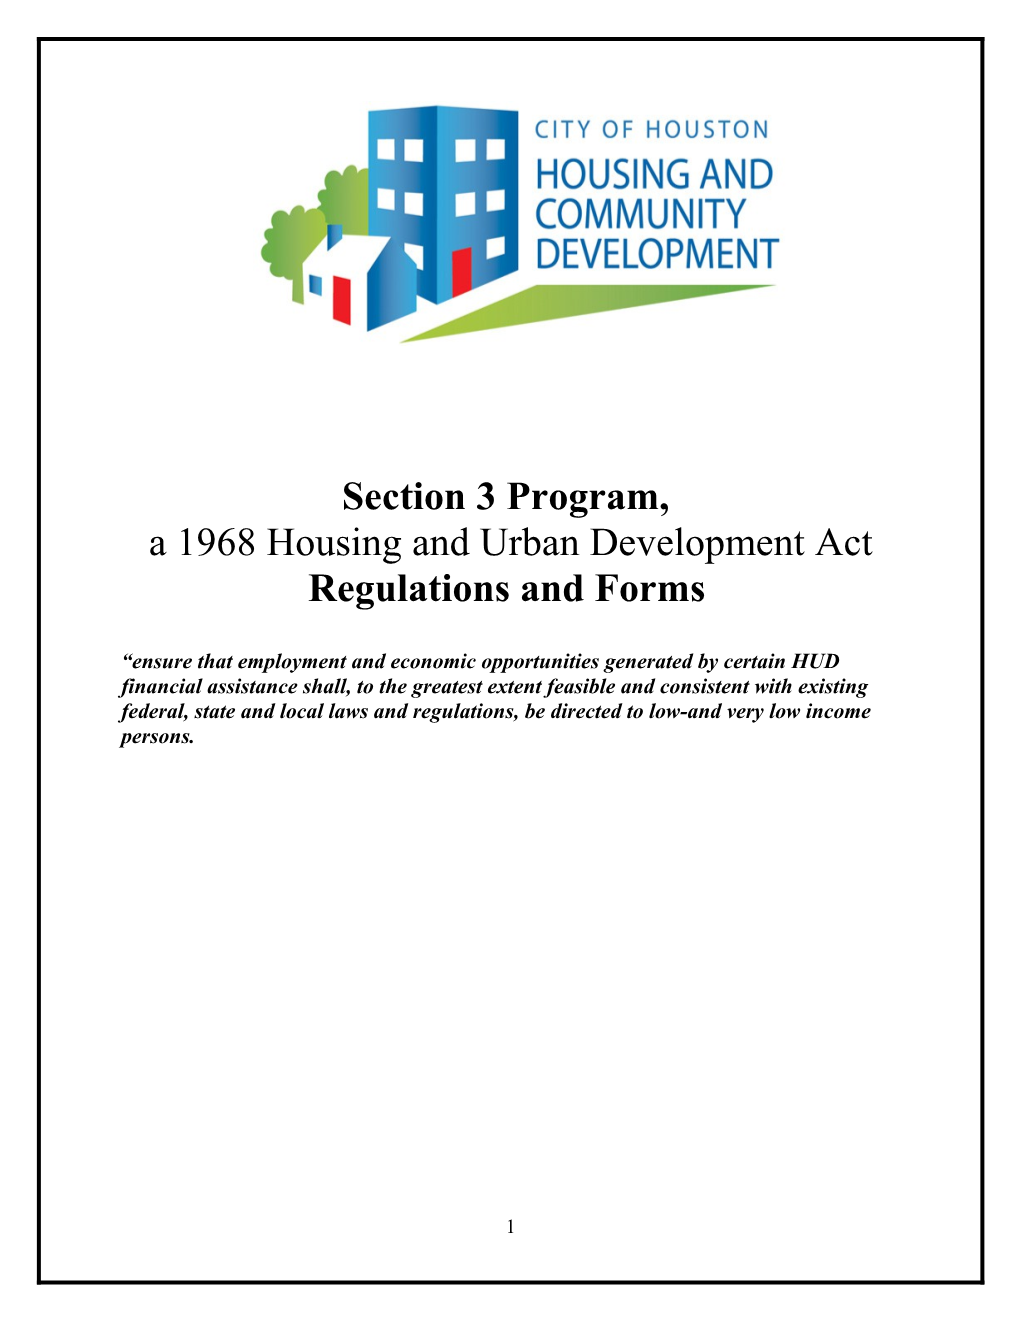 A 1968 Housing and Urban Development Act